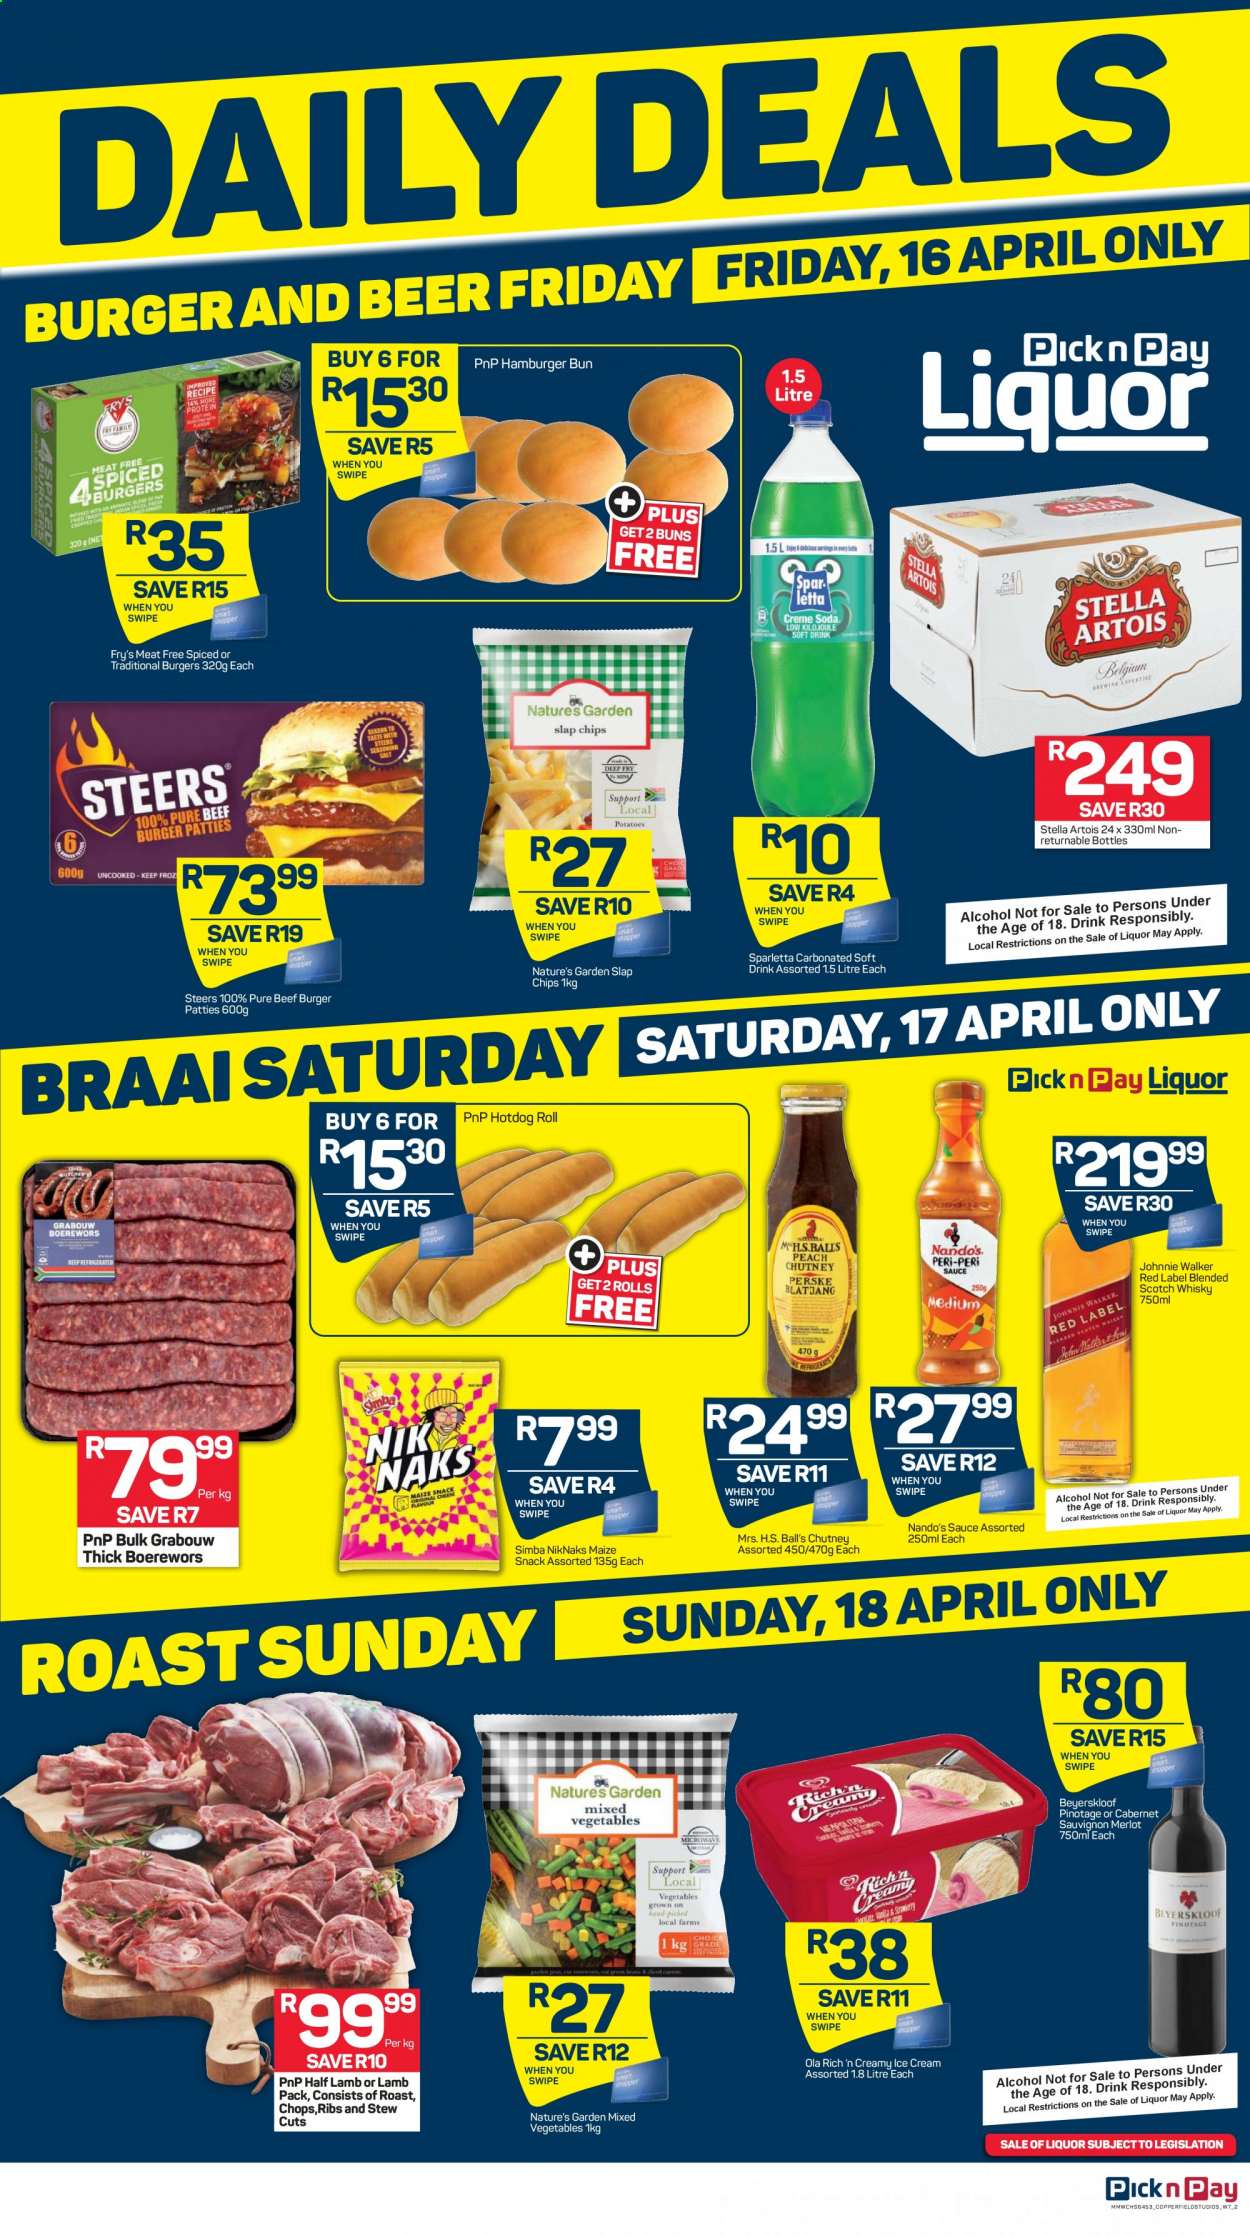 Pick n Pay specials - 04.15.2021 - 04.18.2021. 